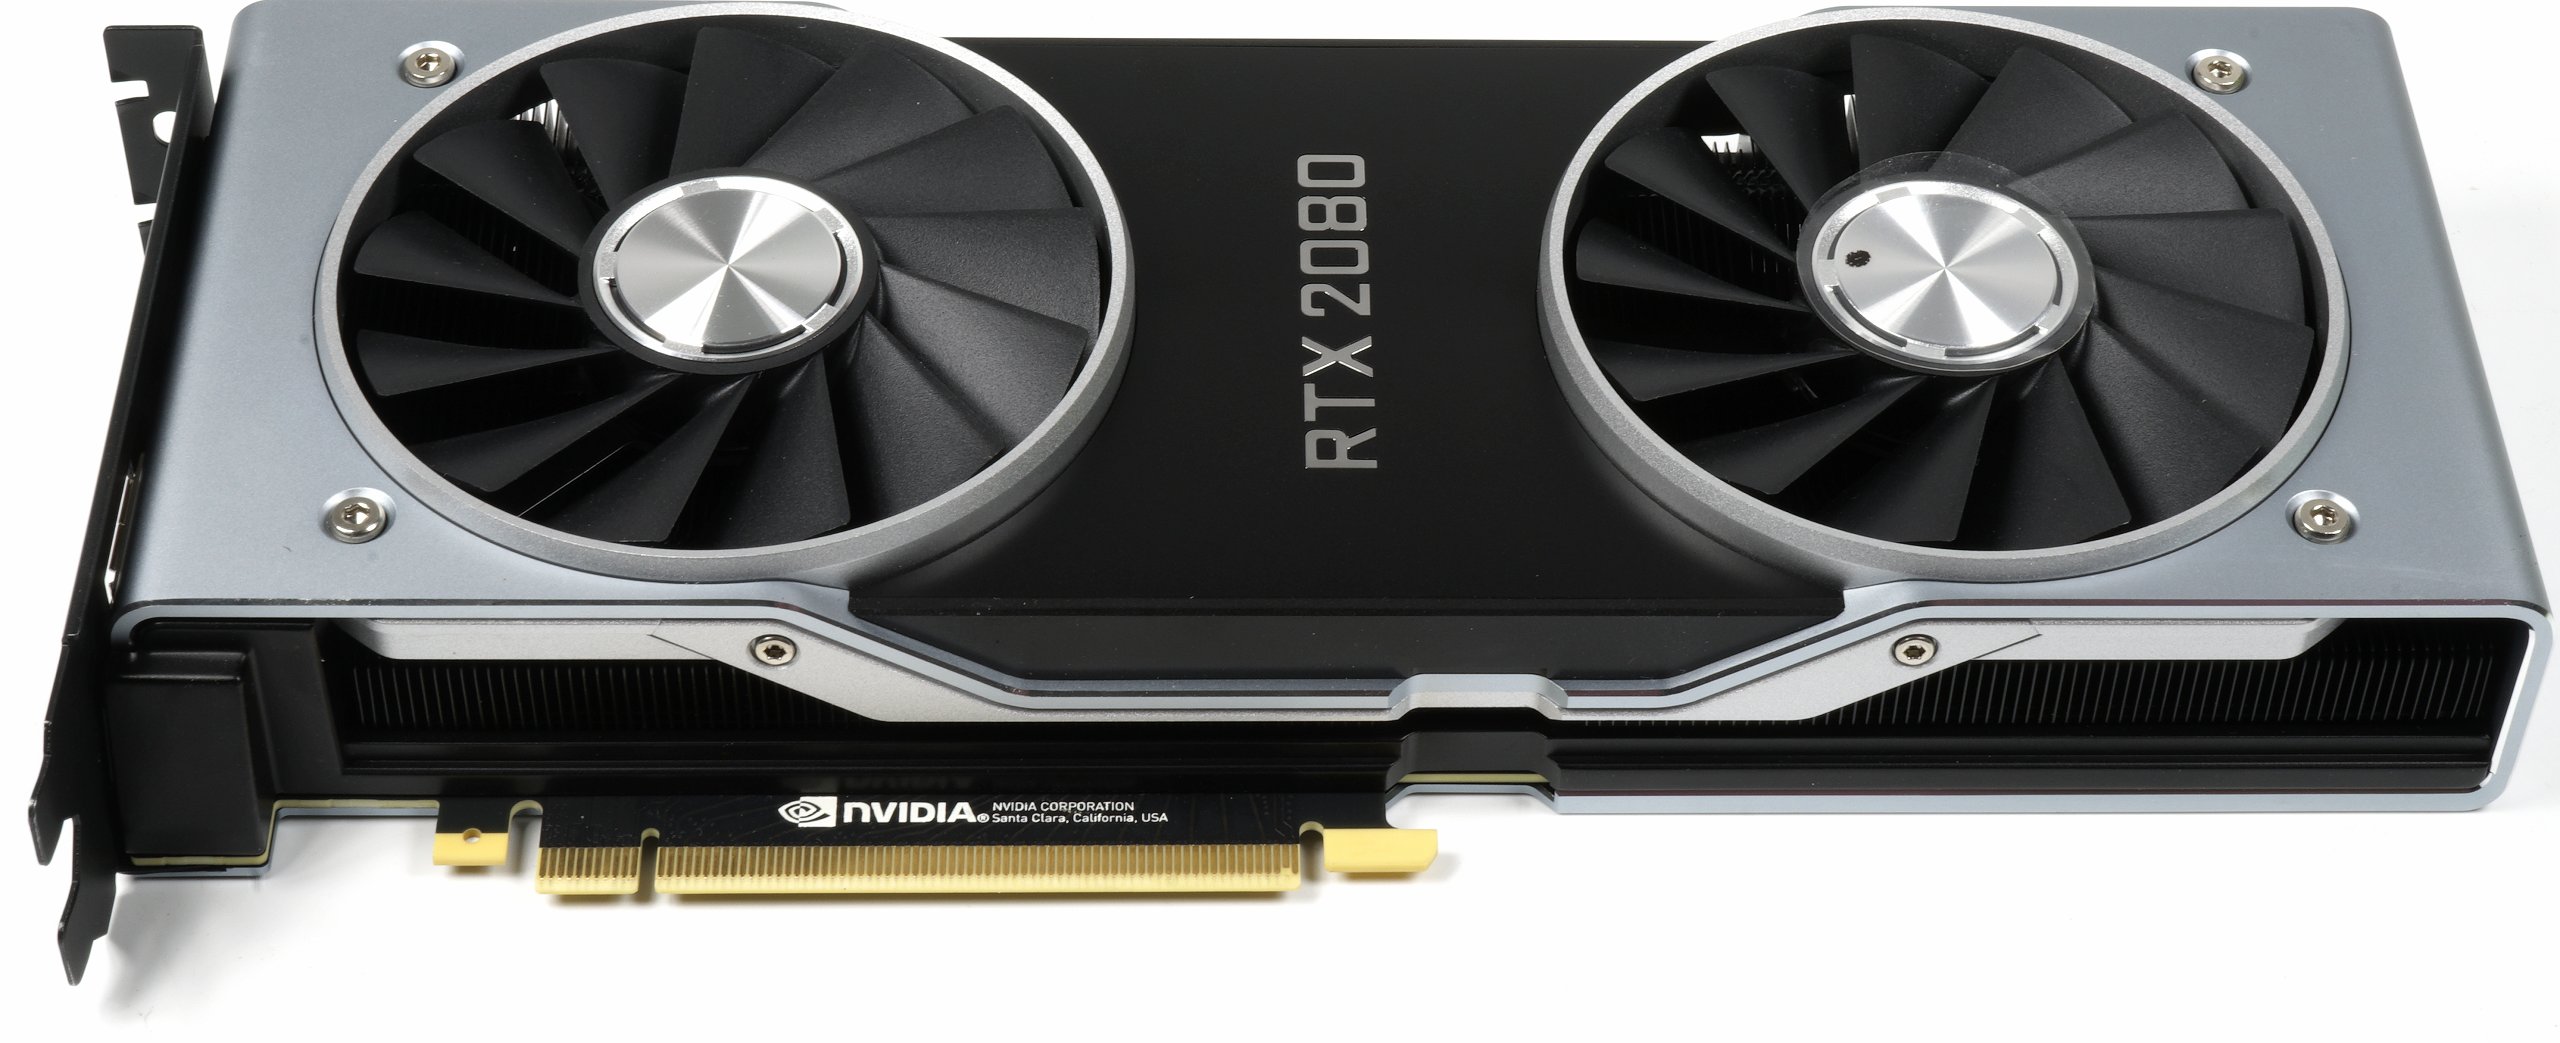 Nvidia GeForce RTX 2080 and RTX 2080 Ti in review - Gaming, Turing